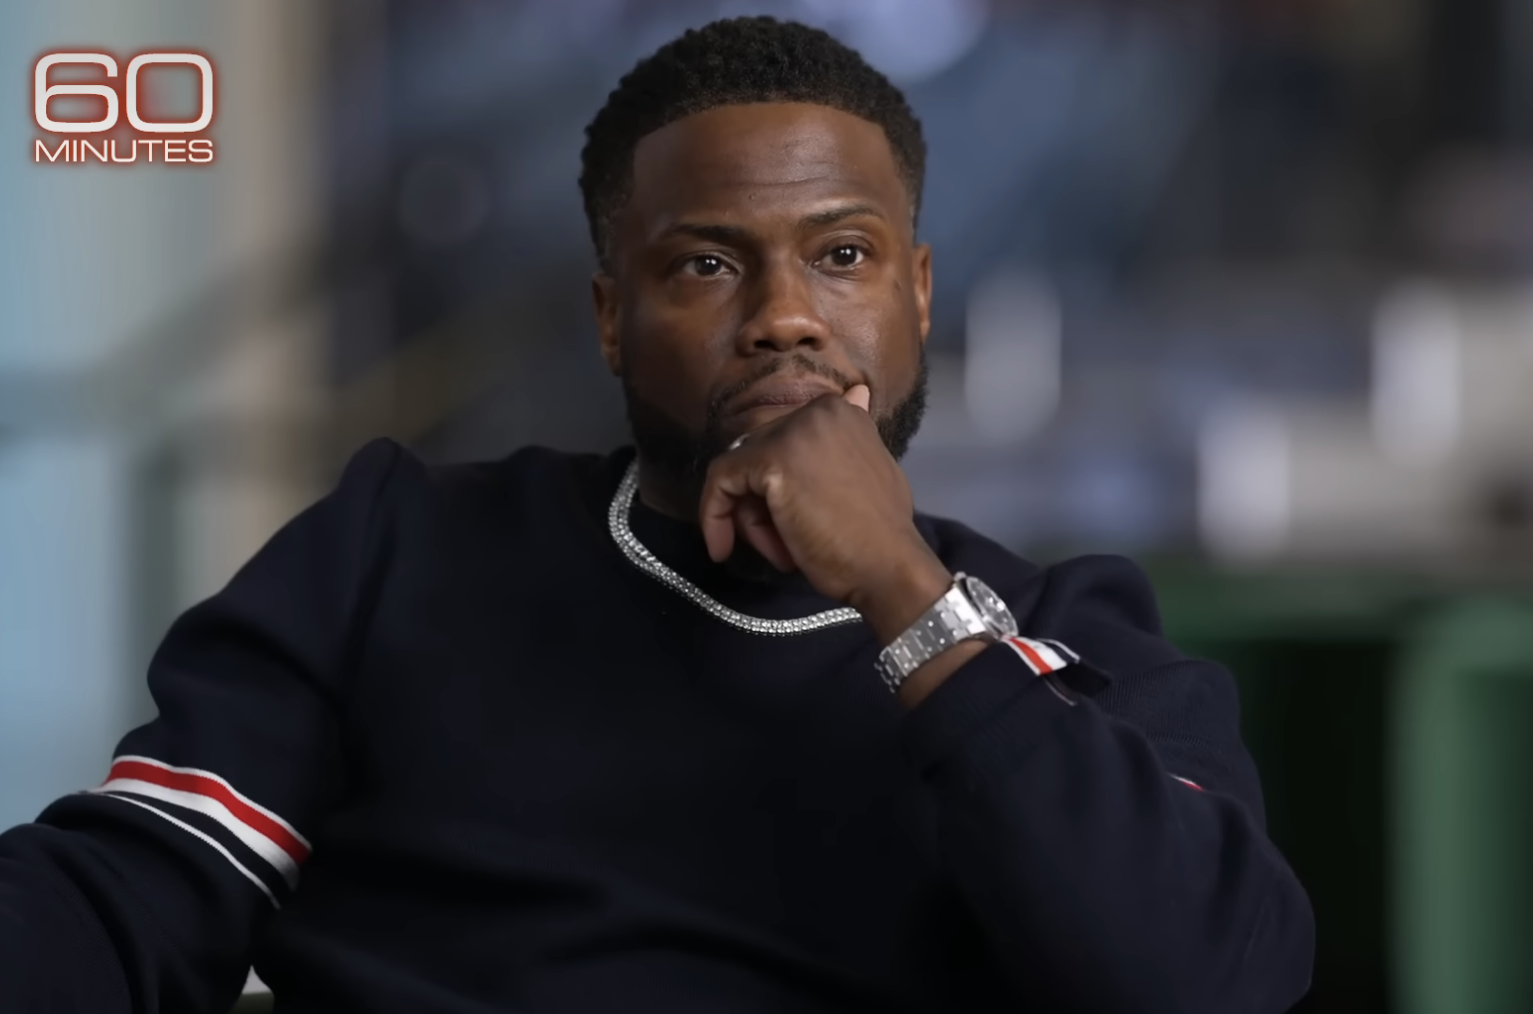 Kevin Hart in a striped sweater sits for an interview on 60 Minutes